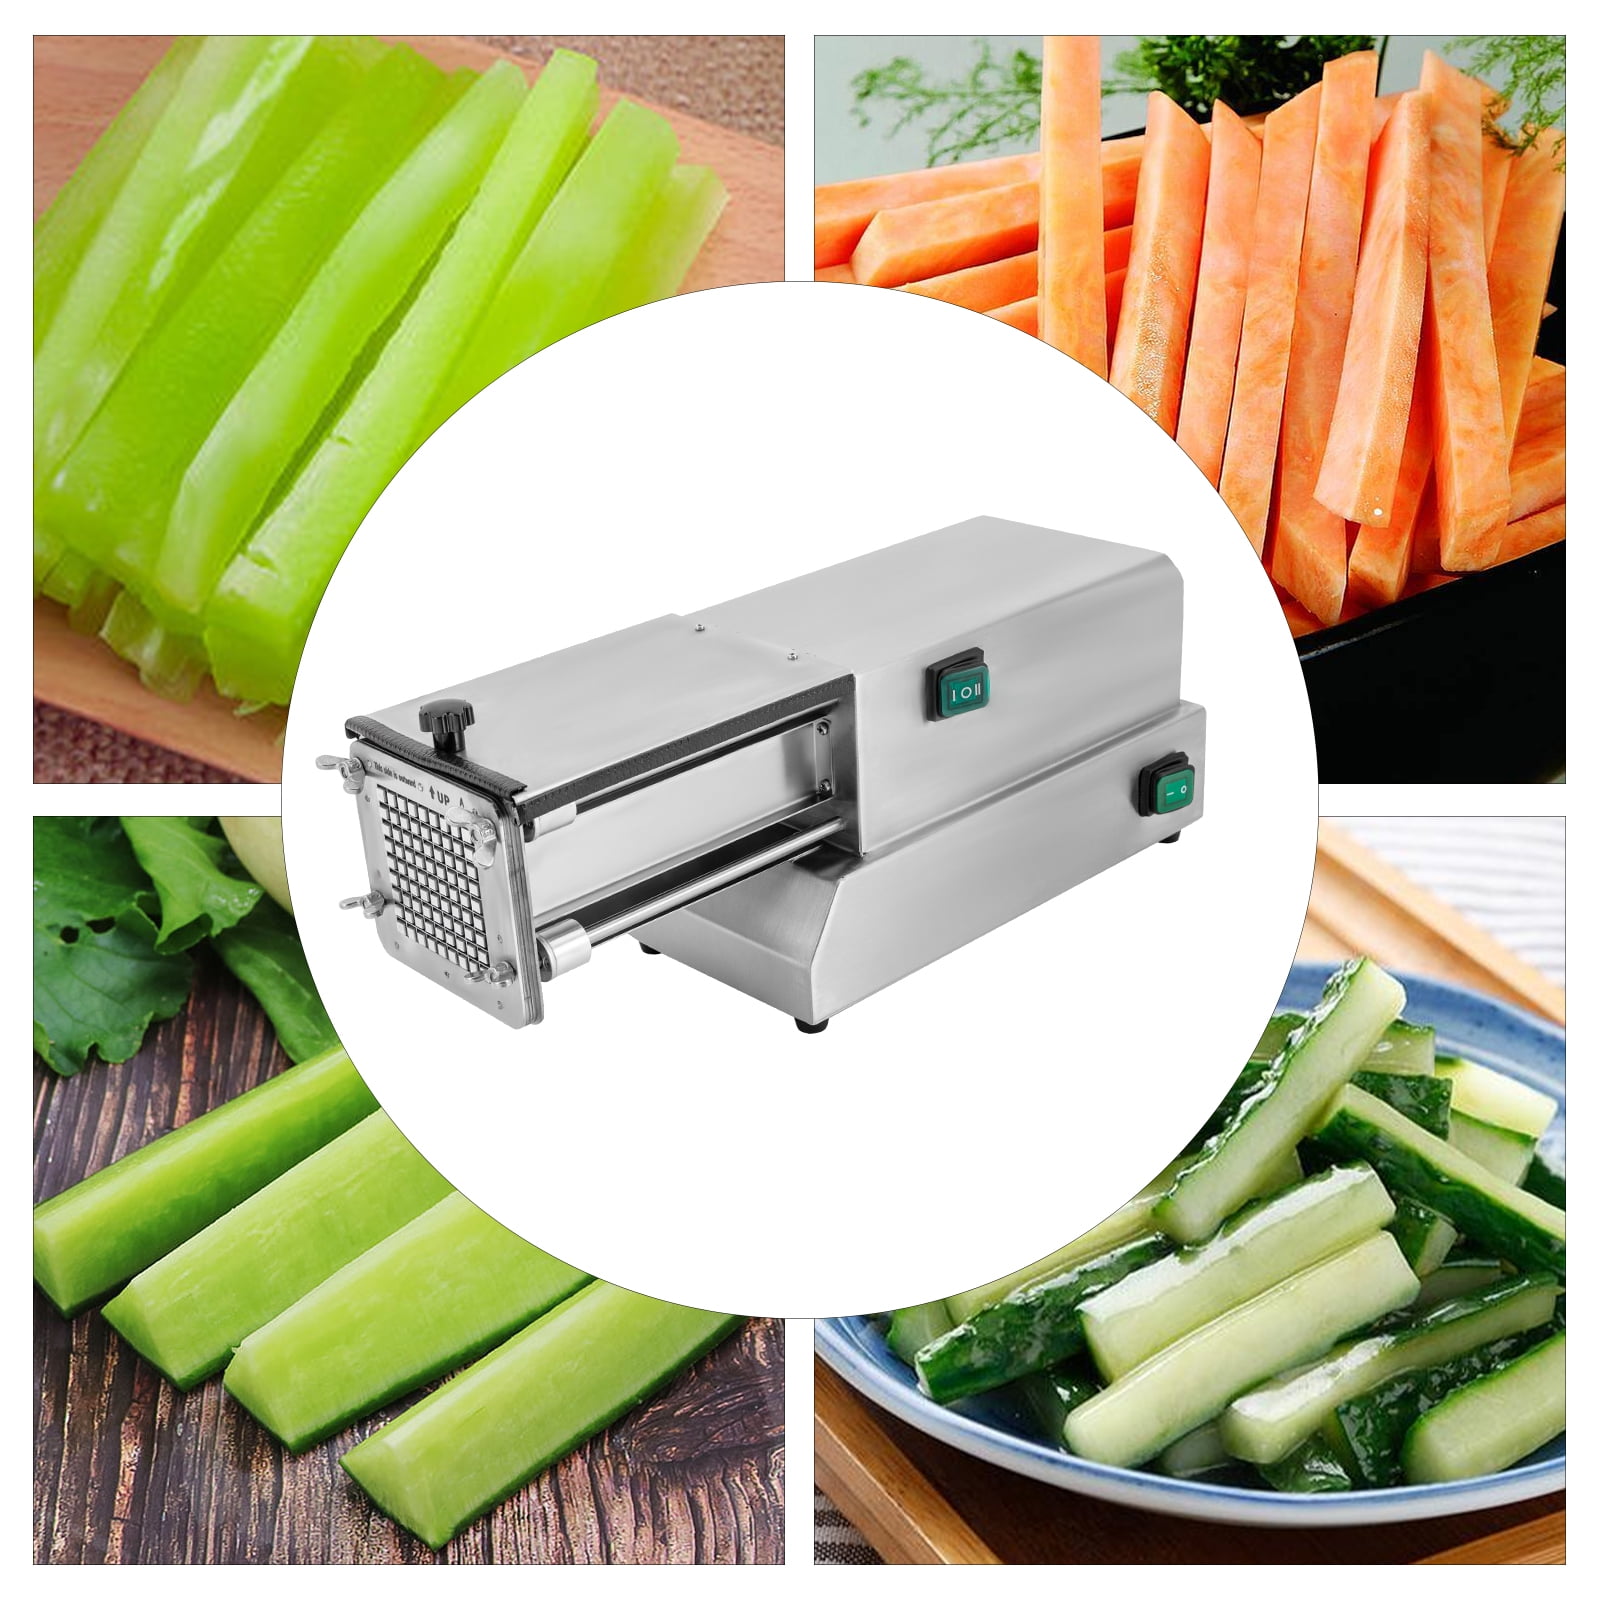 Miumaeov Upgraded Electric Potato Slicer Commercial Onion Slicing Machine Cabbage Shredder Vegetable Fruit Cutter 0-0.4 Stainless Steel, Size: 39.5*29